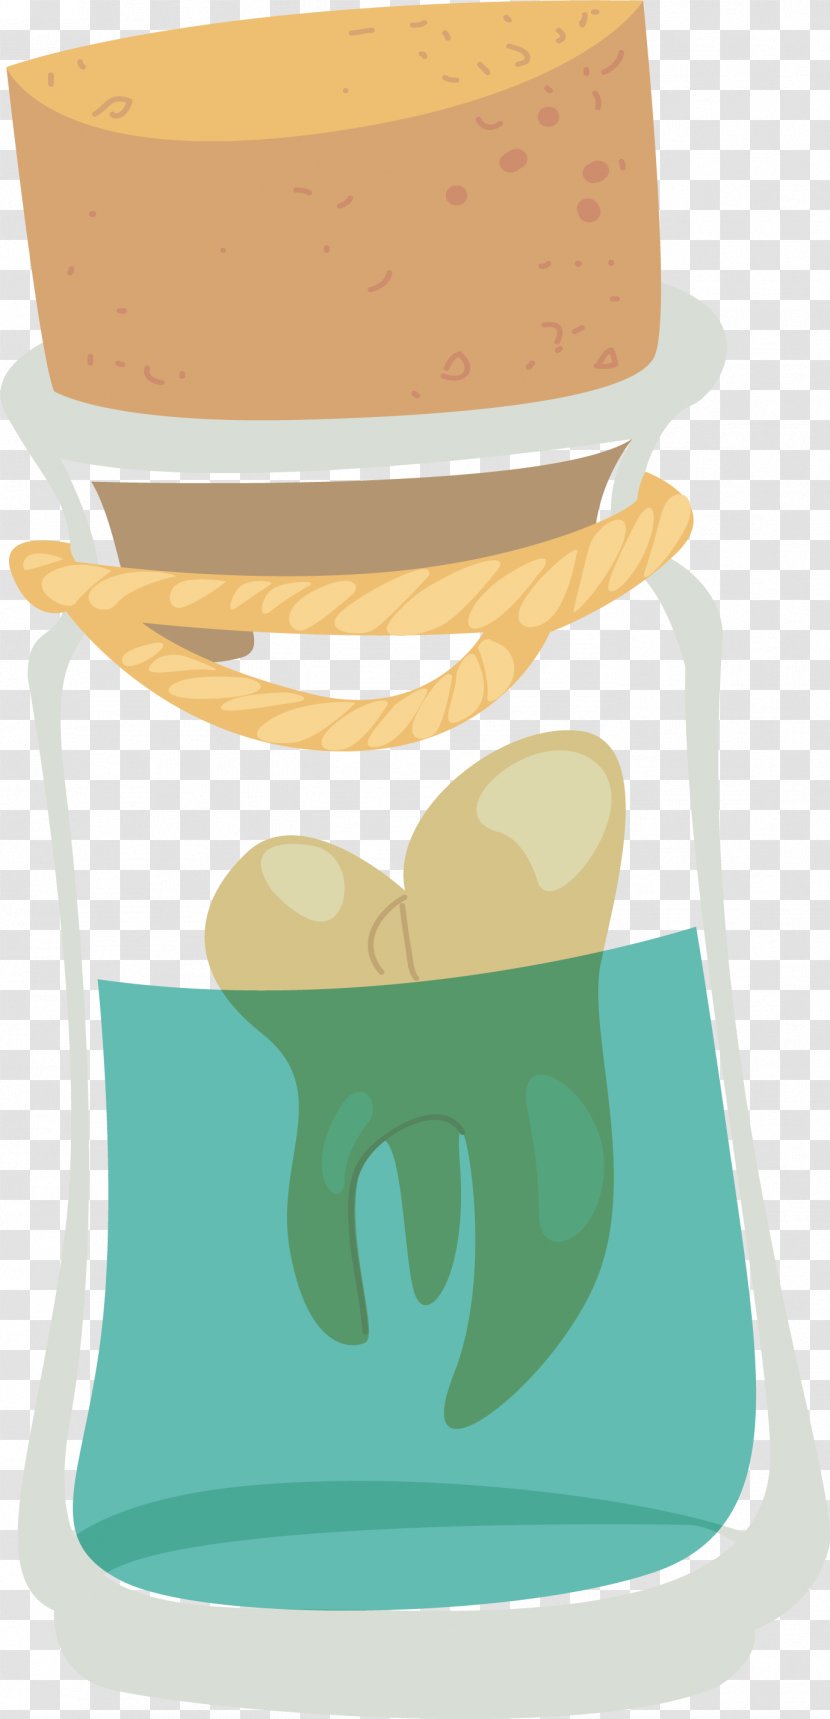 Tooth Adobe Illustrator - Food - The Teeth That Soak In Potion Transparent PNG